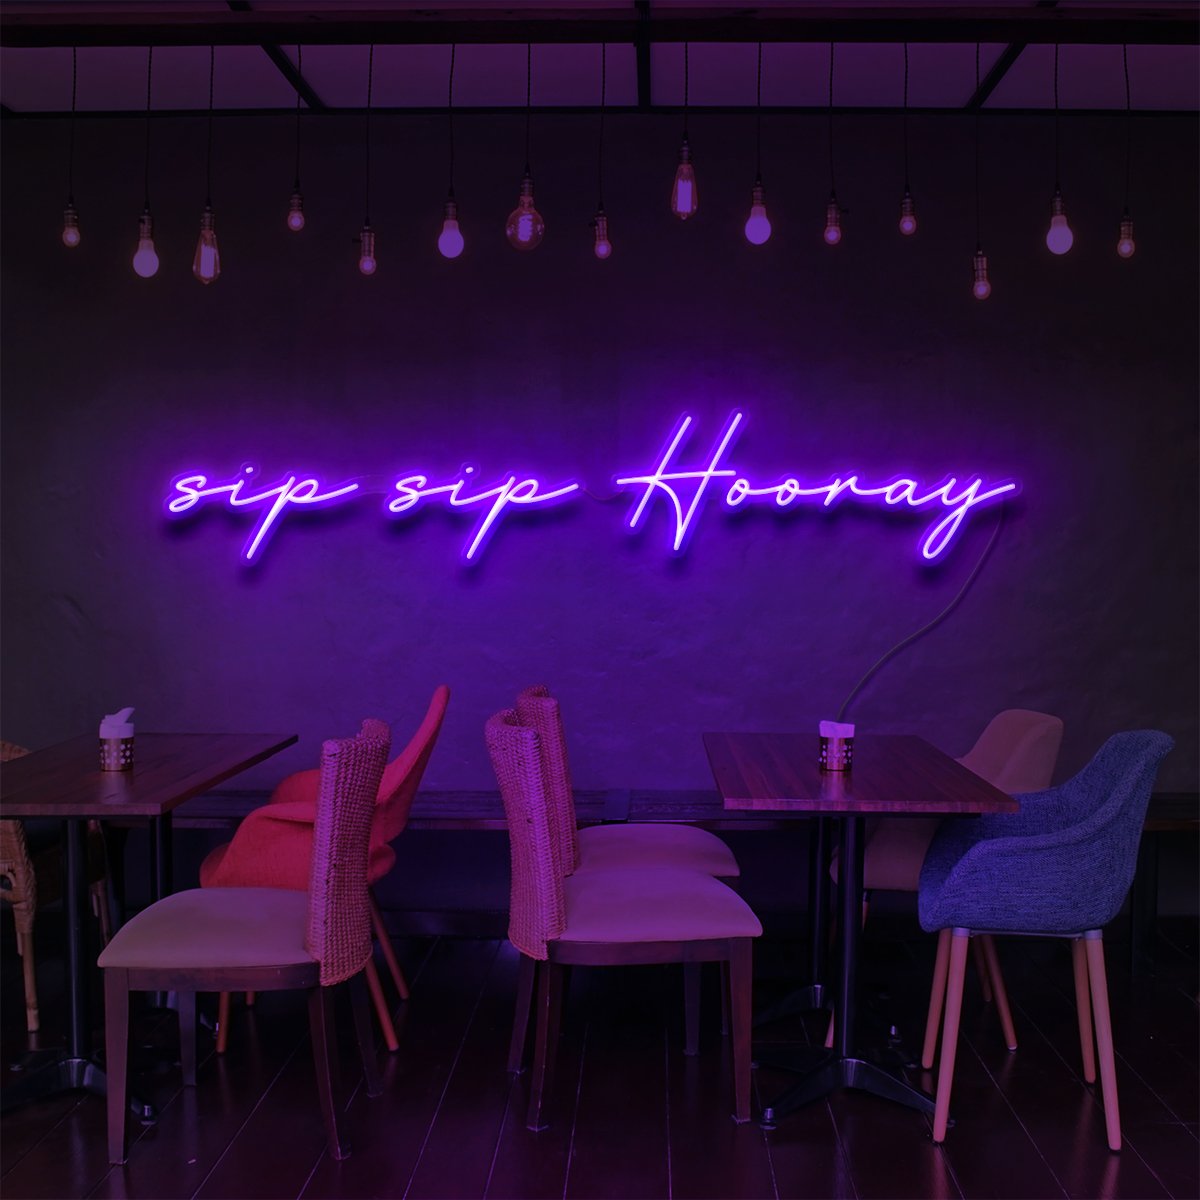 "Sip Sip Hooray" Neon Sign for Bars & Restaurants 90cm (3ft) / Purple / LED Neon by Neon Icons